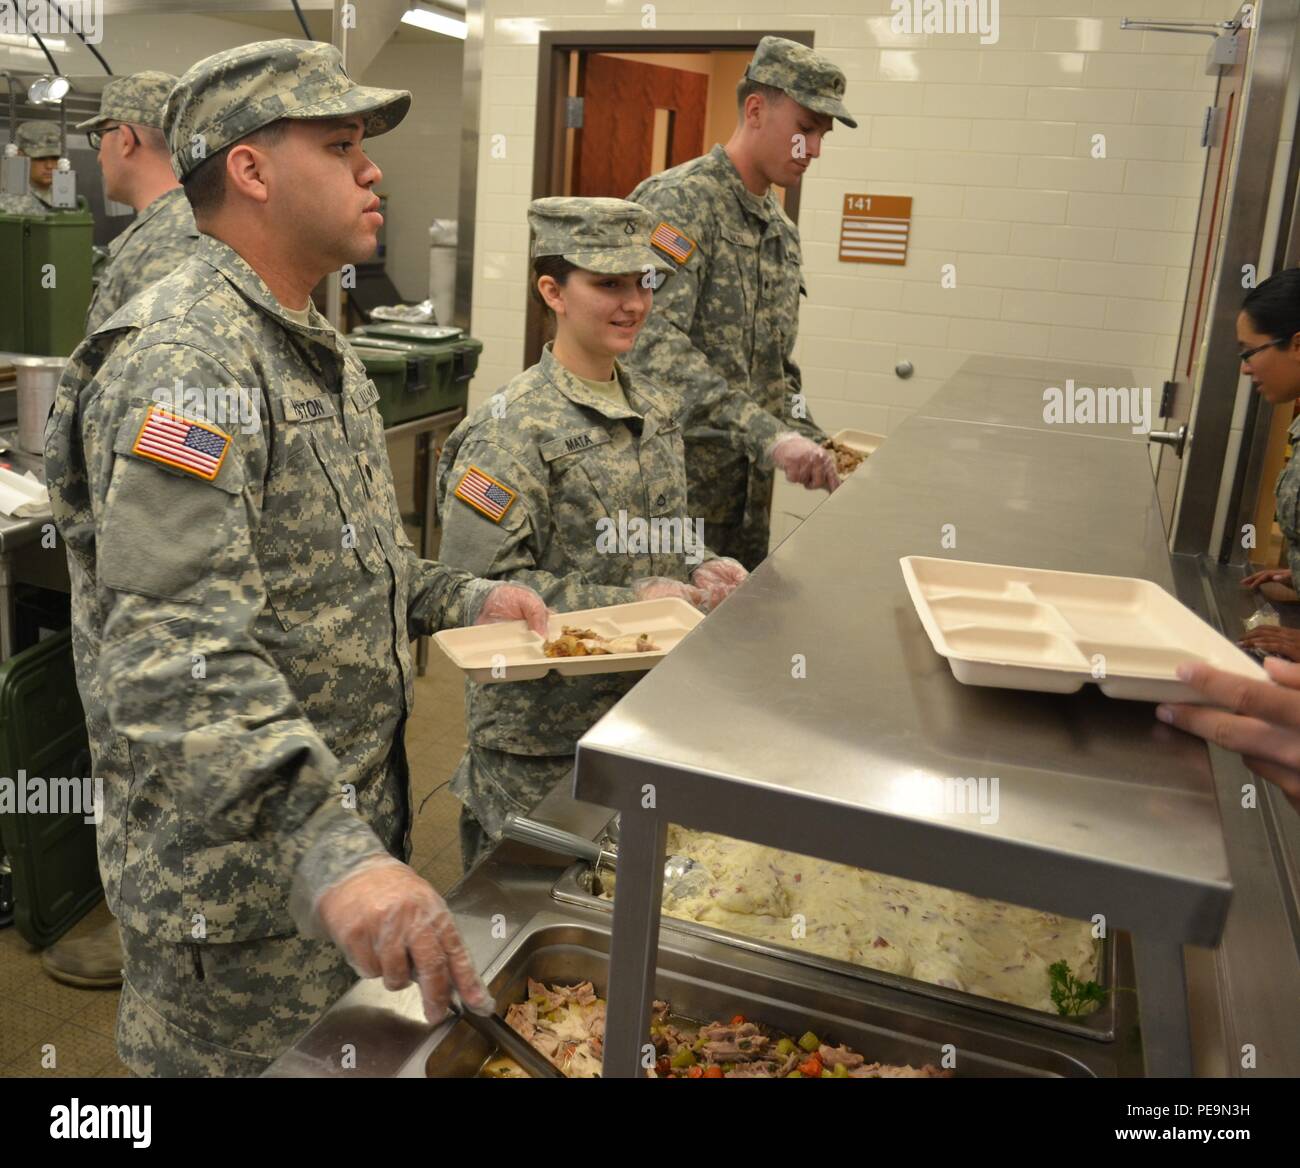 Spc. Marcos Houston and Pfc. Genephere Mata, 650th Regional Support Group, serve lunch to hungry Soldiers during their participation in a Joint Culinary Training Program exercise at the George W. Dunaway Army Reserve Center in Sloan, Nev., Nov. 15. Sponsored by the Joint Culinary Training Program, this training is designed to be a module for identifying those personnel who will compete at the annual U.S. Army Culinary Arts Competition held at Fort Lee, Va. Stock Photo